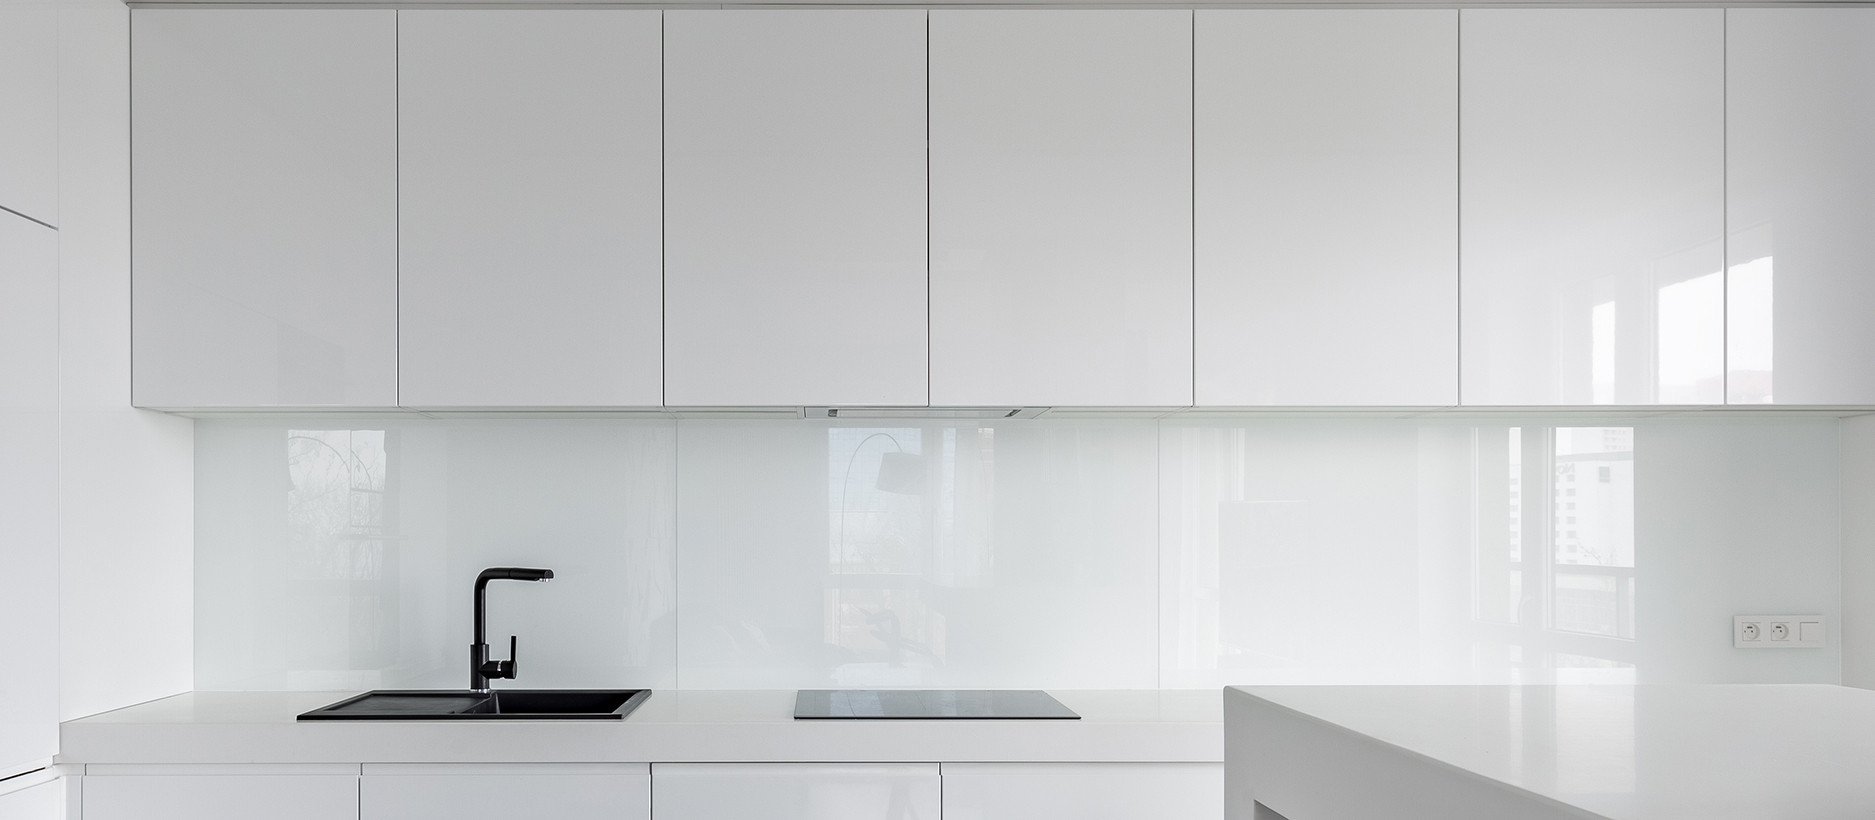 High Gloss White Kitchen Cabinet
 Advantages of high gloss kitchen cabinets